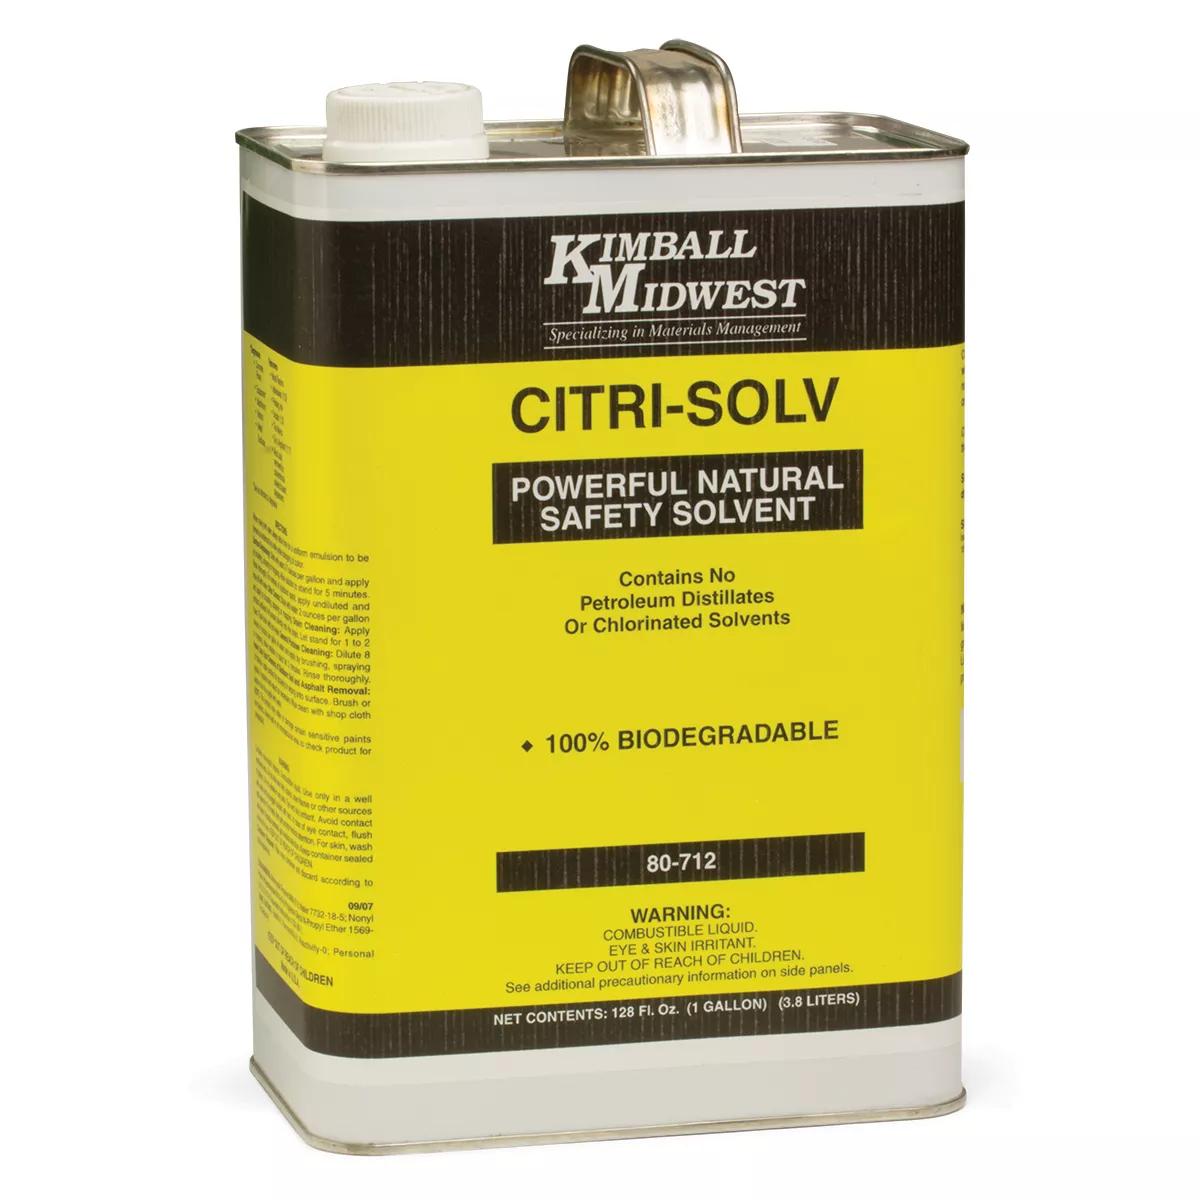 Citri-Solv Powerful Natural Safety Solvent - One Quart Can - Bulk